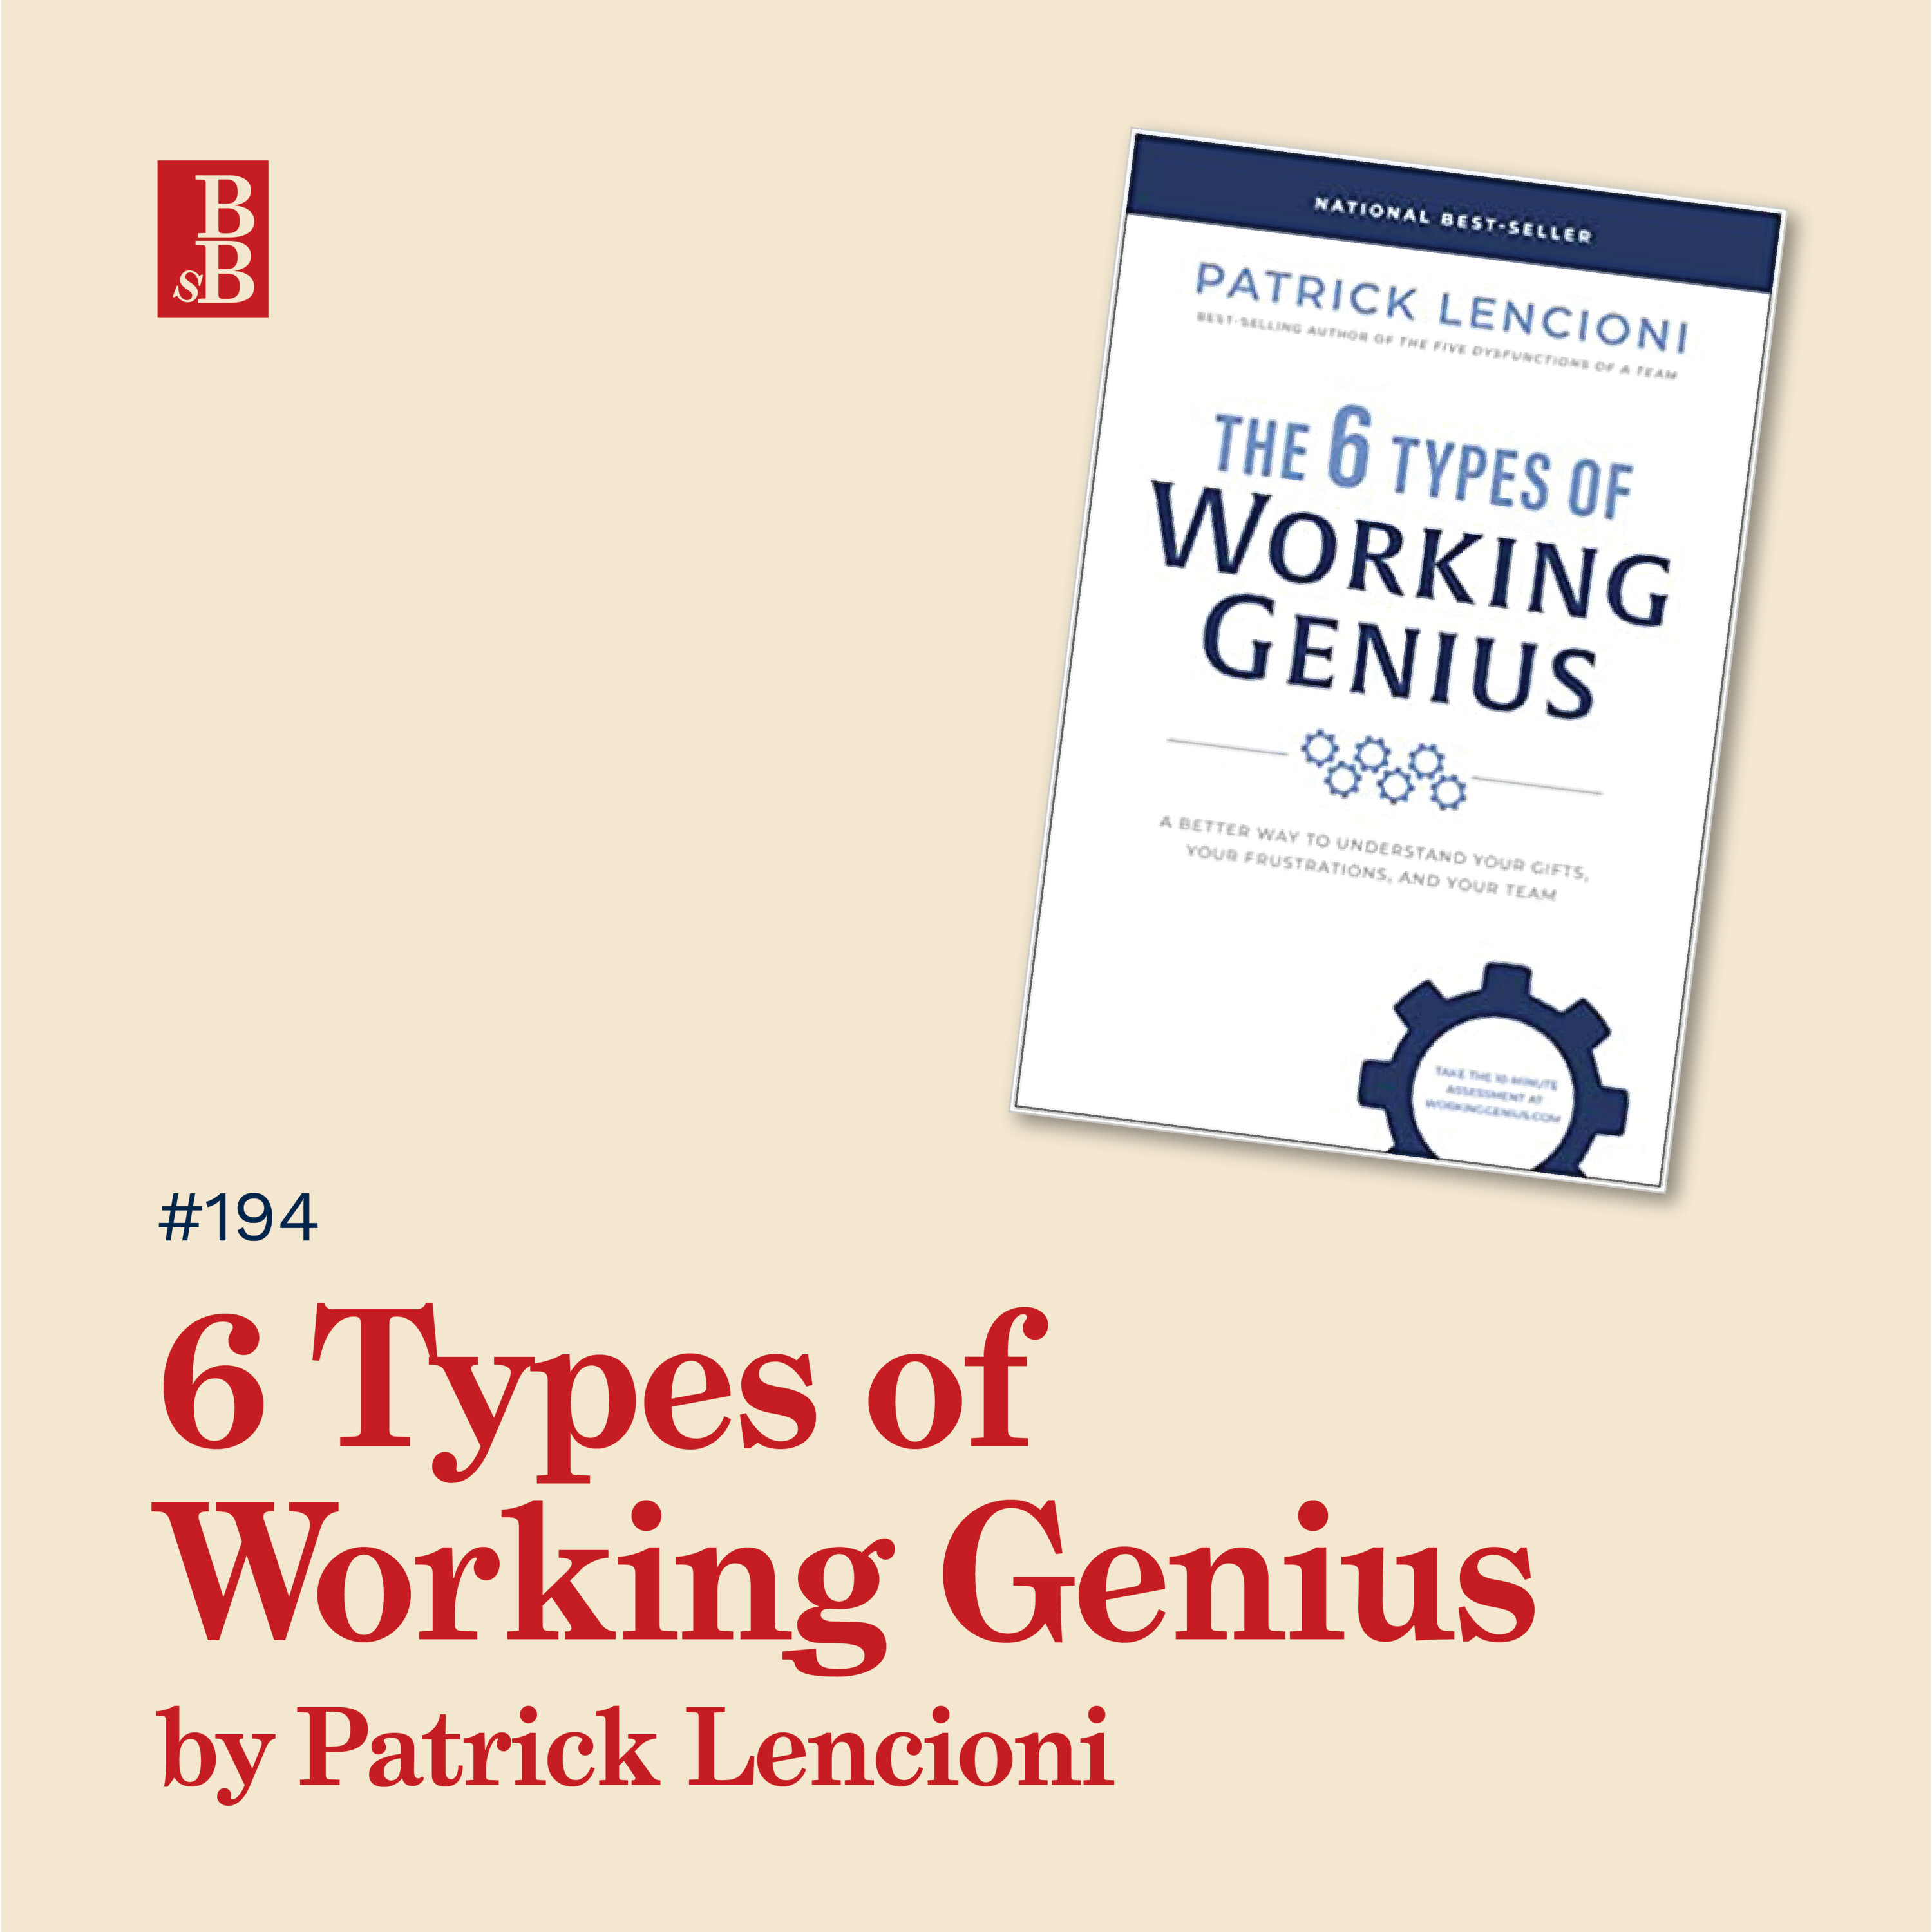 The 6 Types of Working Genius by Patrick Lencioni: how to find out if you're a genius or frustrated Image